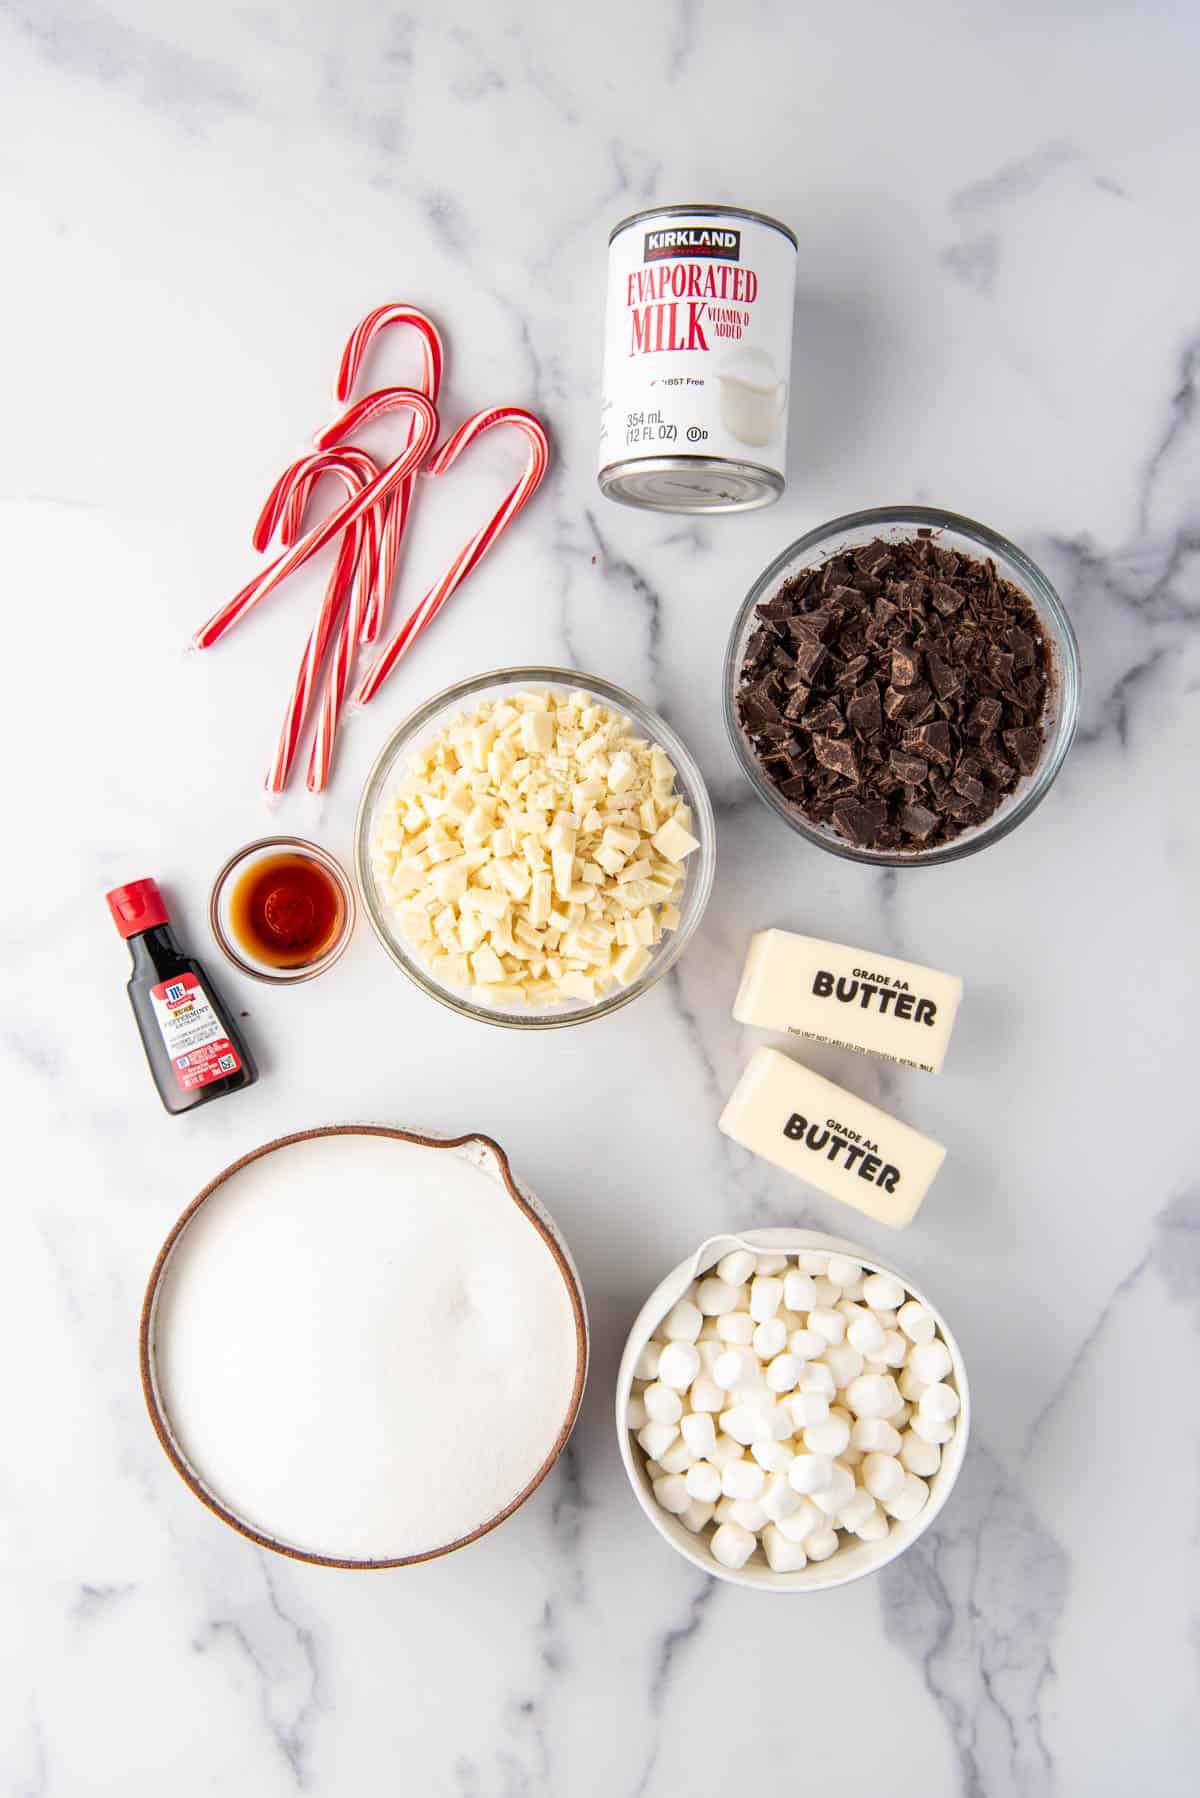 Ingredients for making peppermint bark fudge.